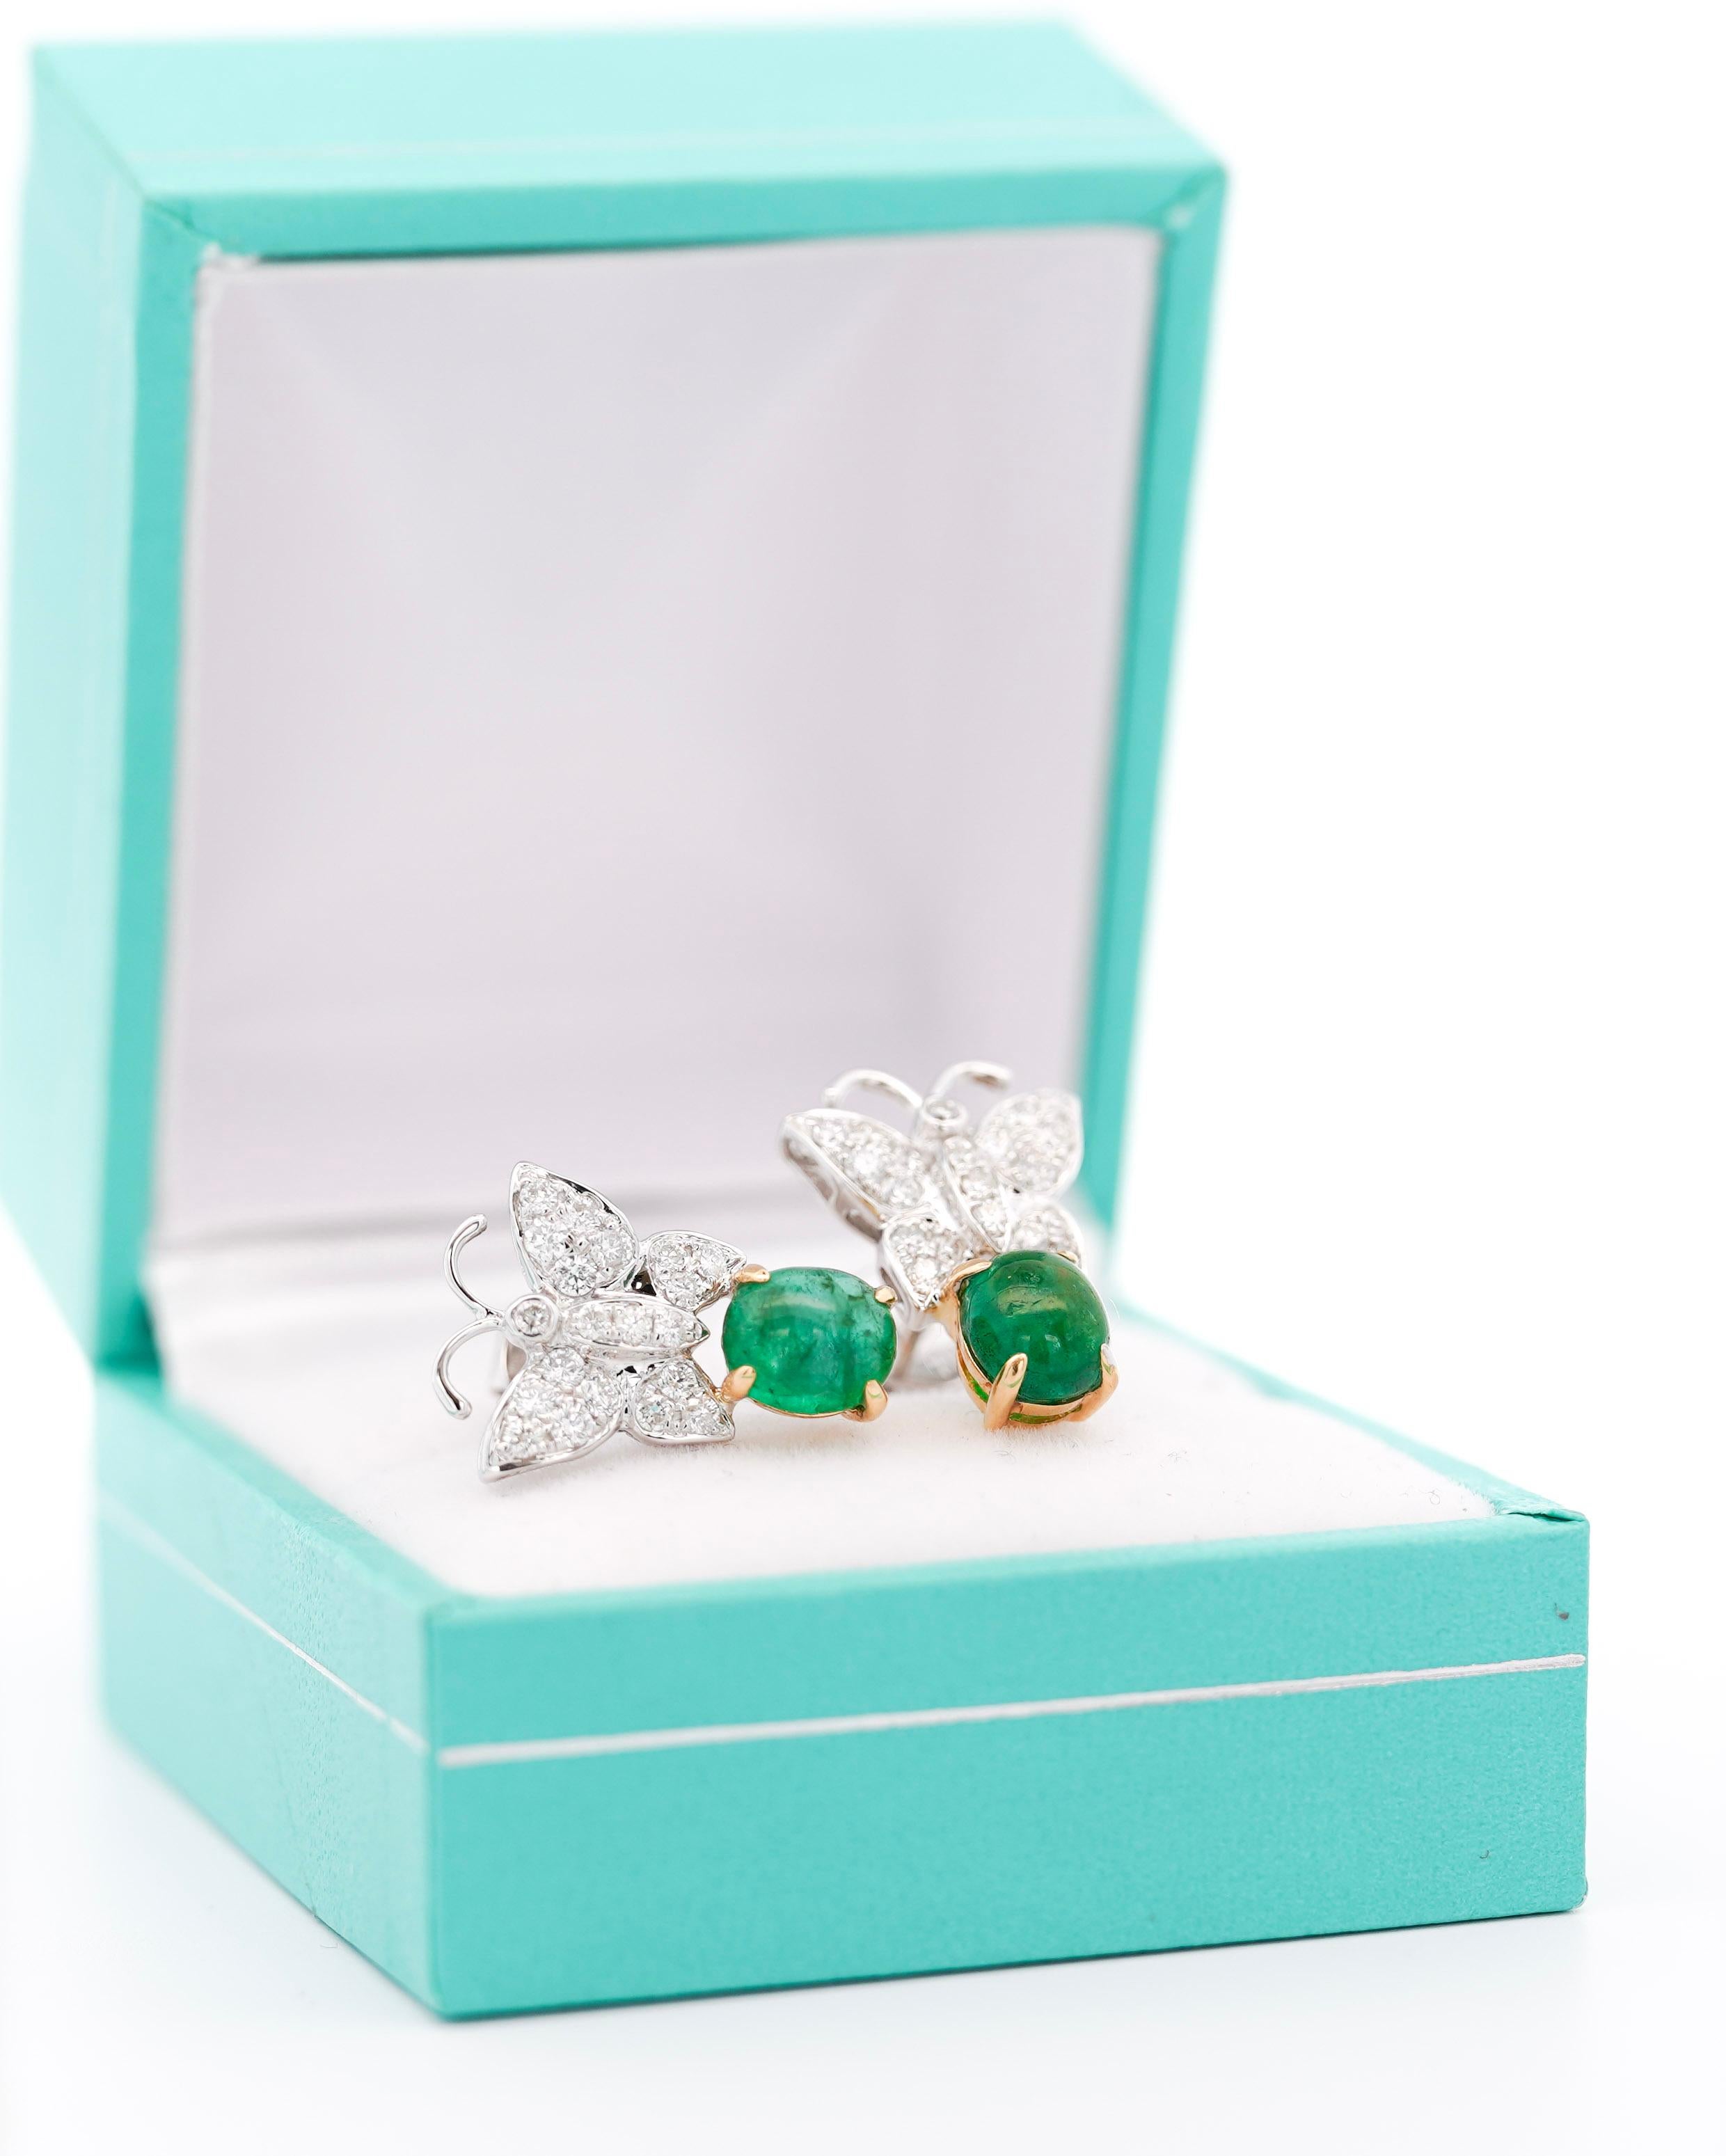 Breathtaking Natural Green Emerald and Diamond Butterfly Motif Drop Earrings, set in 18K White Gold.

The earrings feature 2 cabochon-cut emeralds in a prong setting of over 2 carats. Bearing a bright green color and excellent vibrancy. The diamond